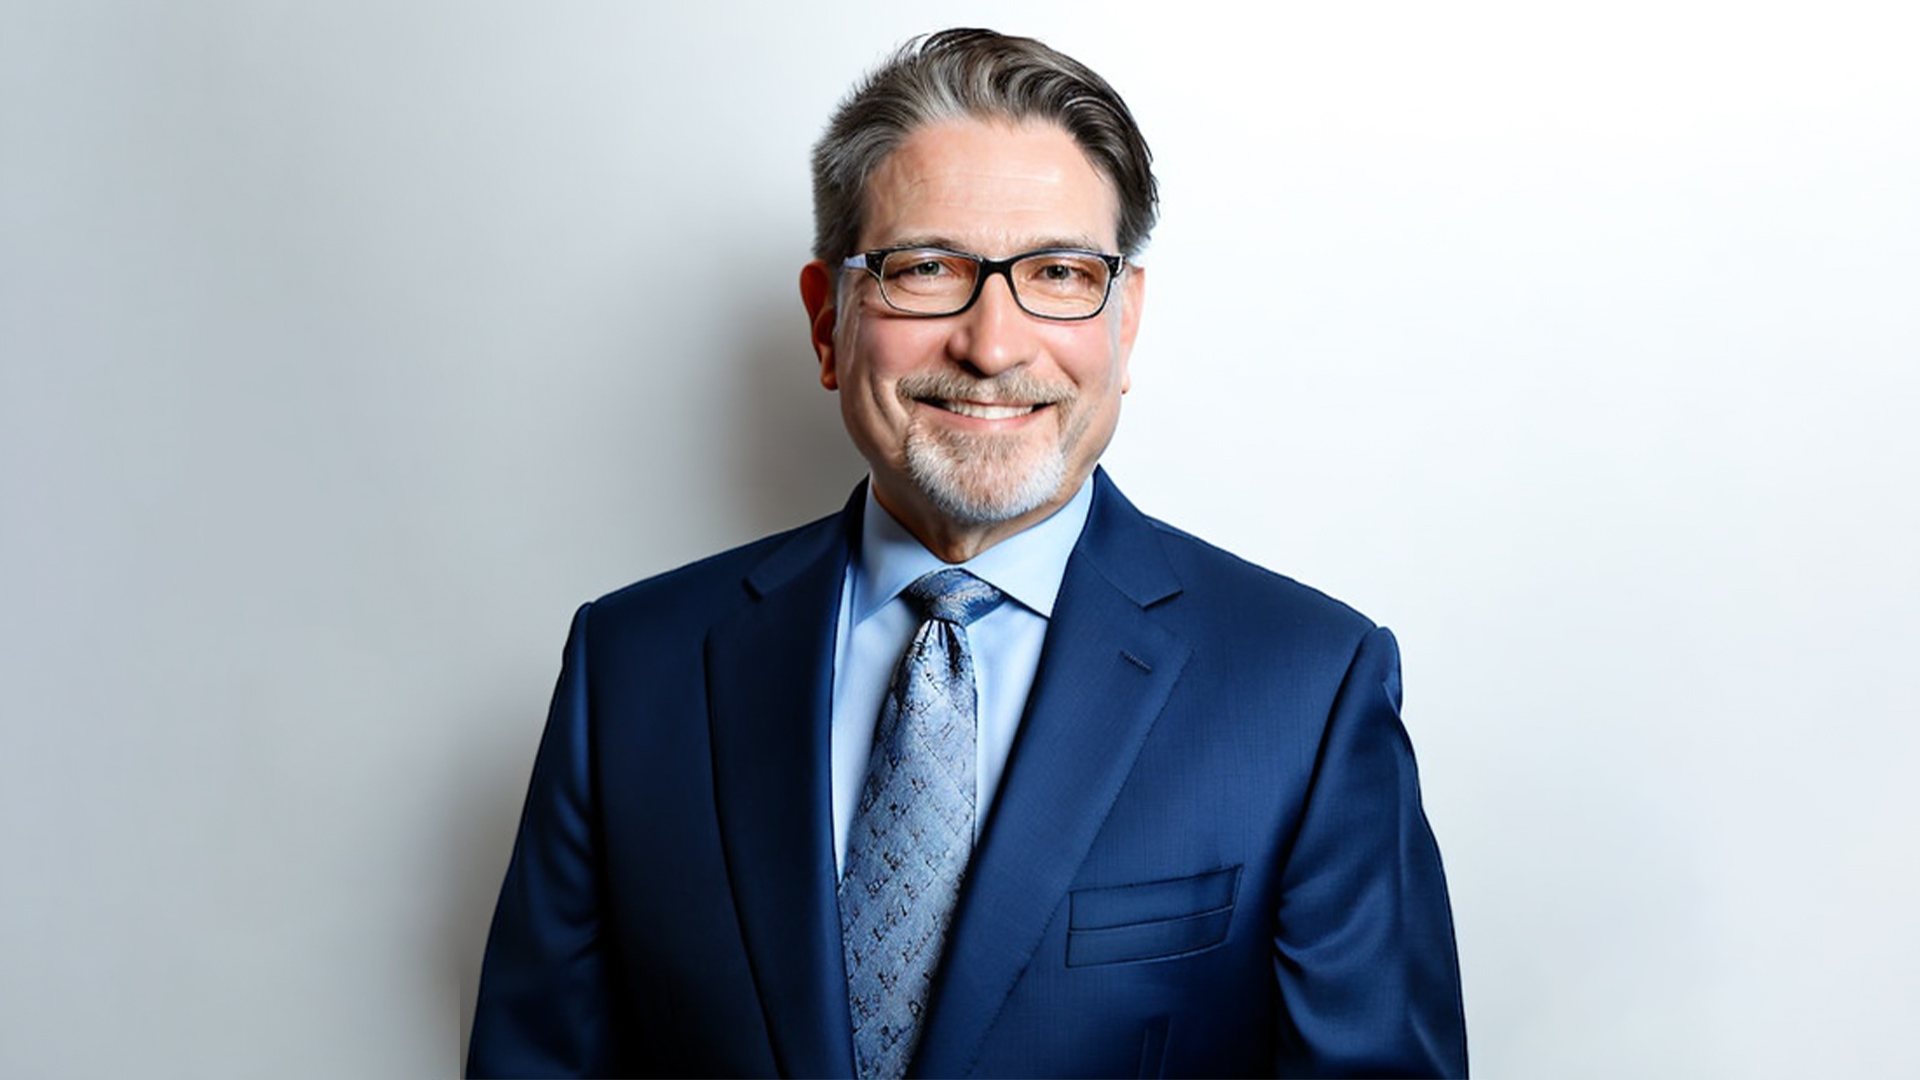 man in glasses and suit smiling